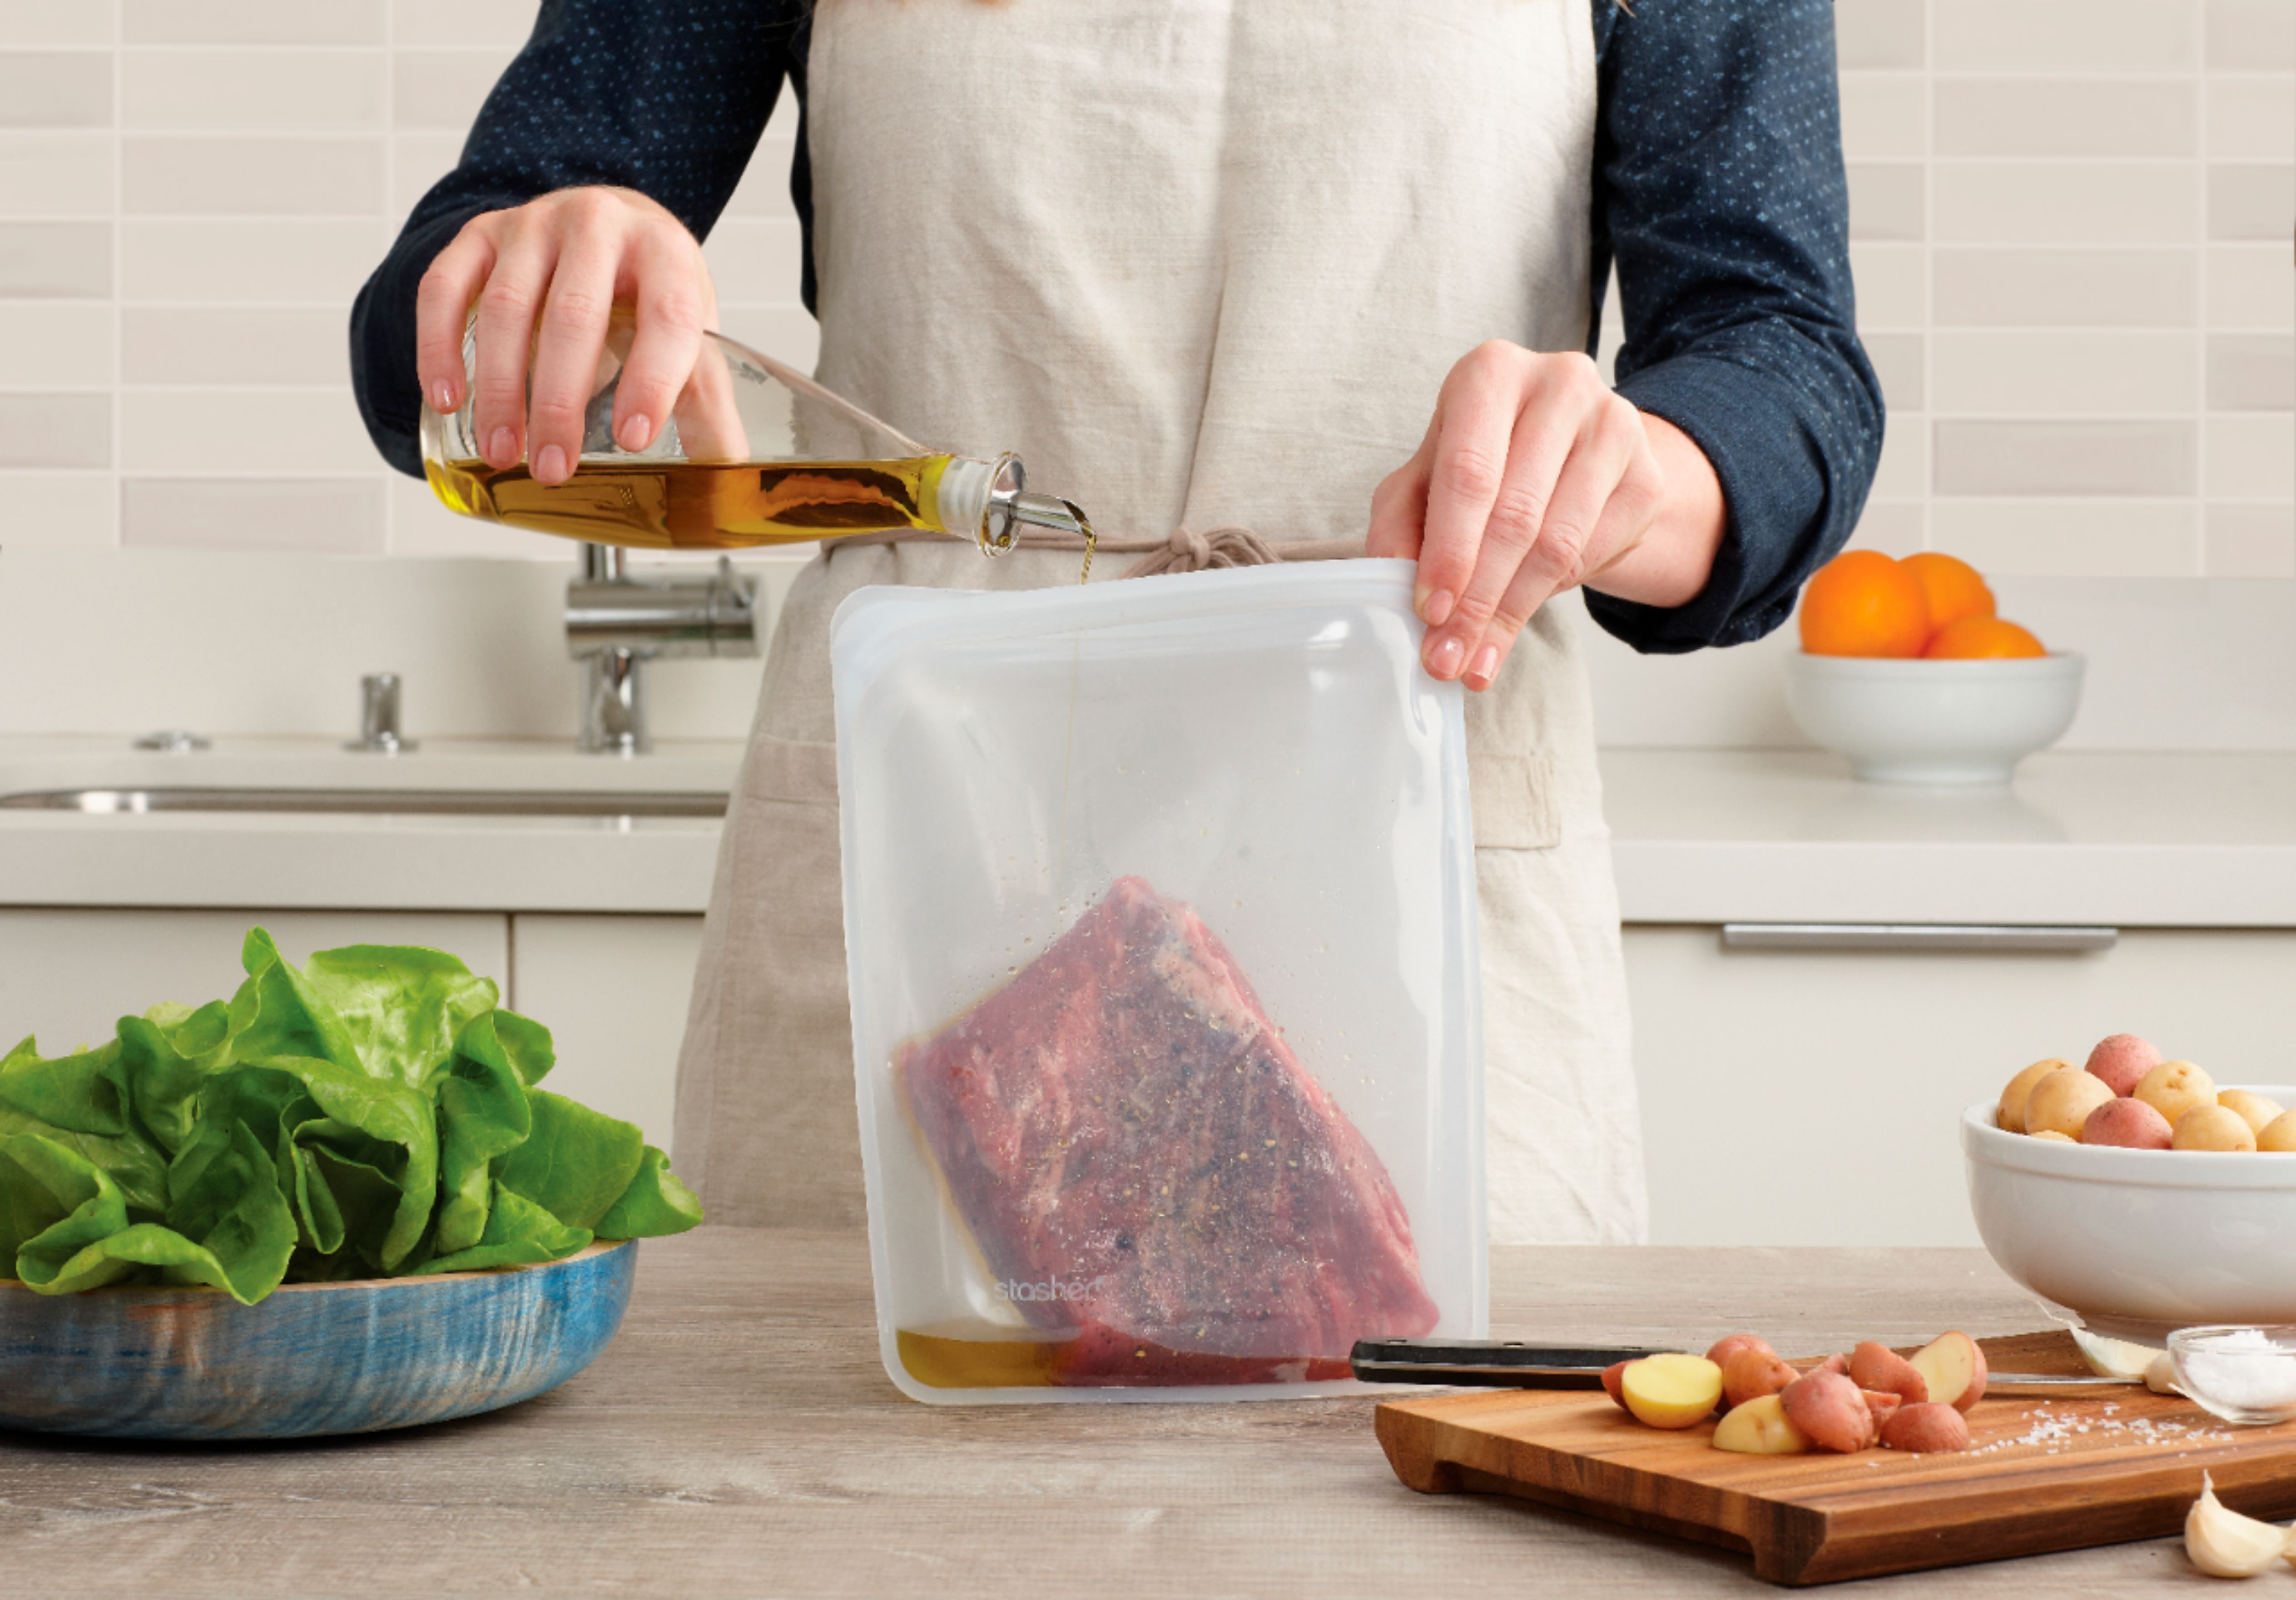 Stasher® Reusable Silicone Storage Bag - Clear, 0.5 gal - Kroger